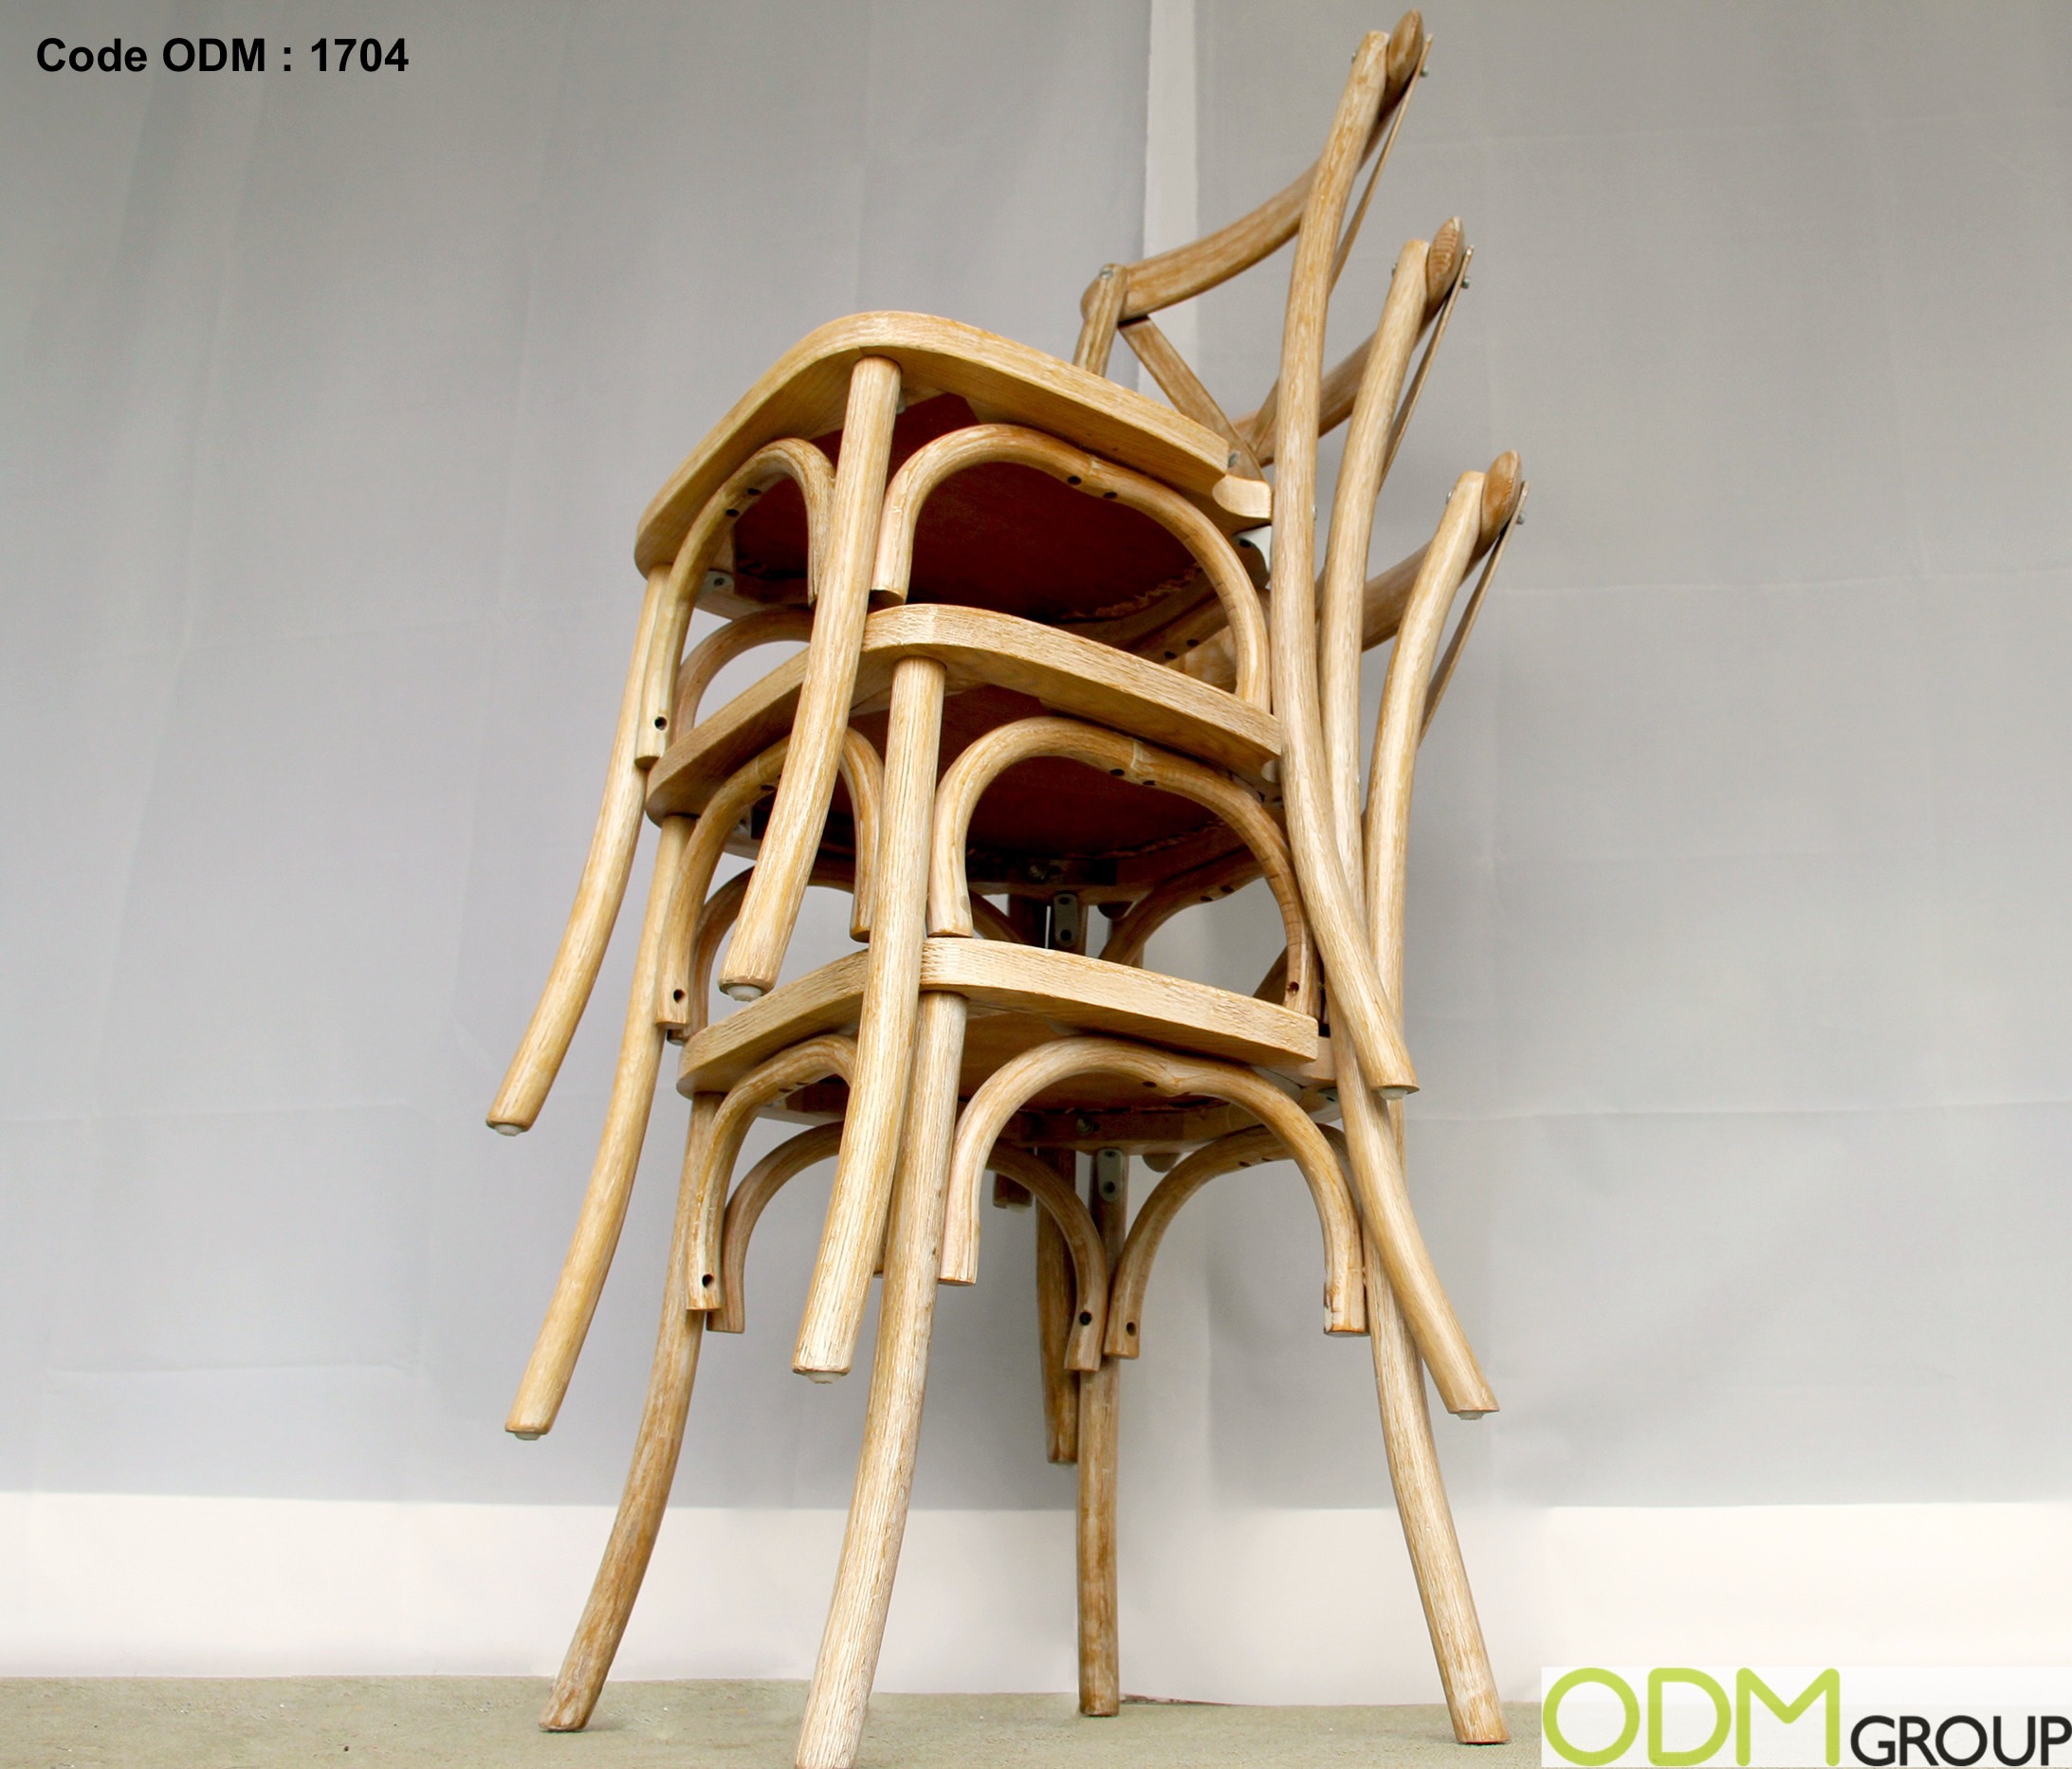 Custom Furniture for Events - High Quality Wooden Chairs